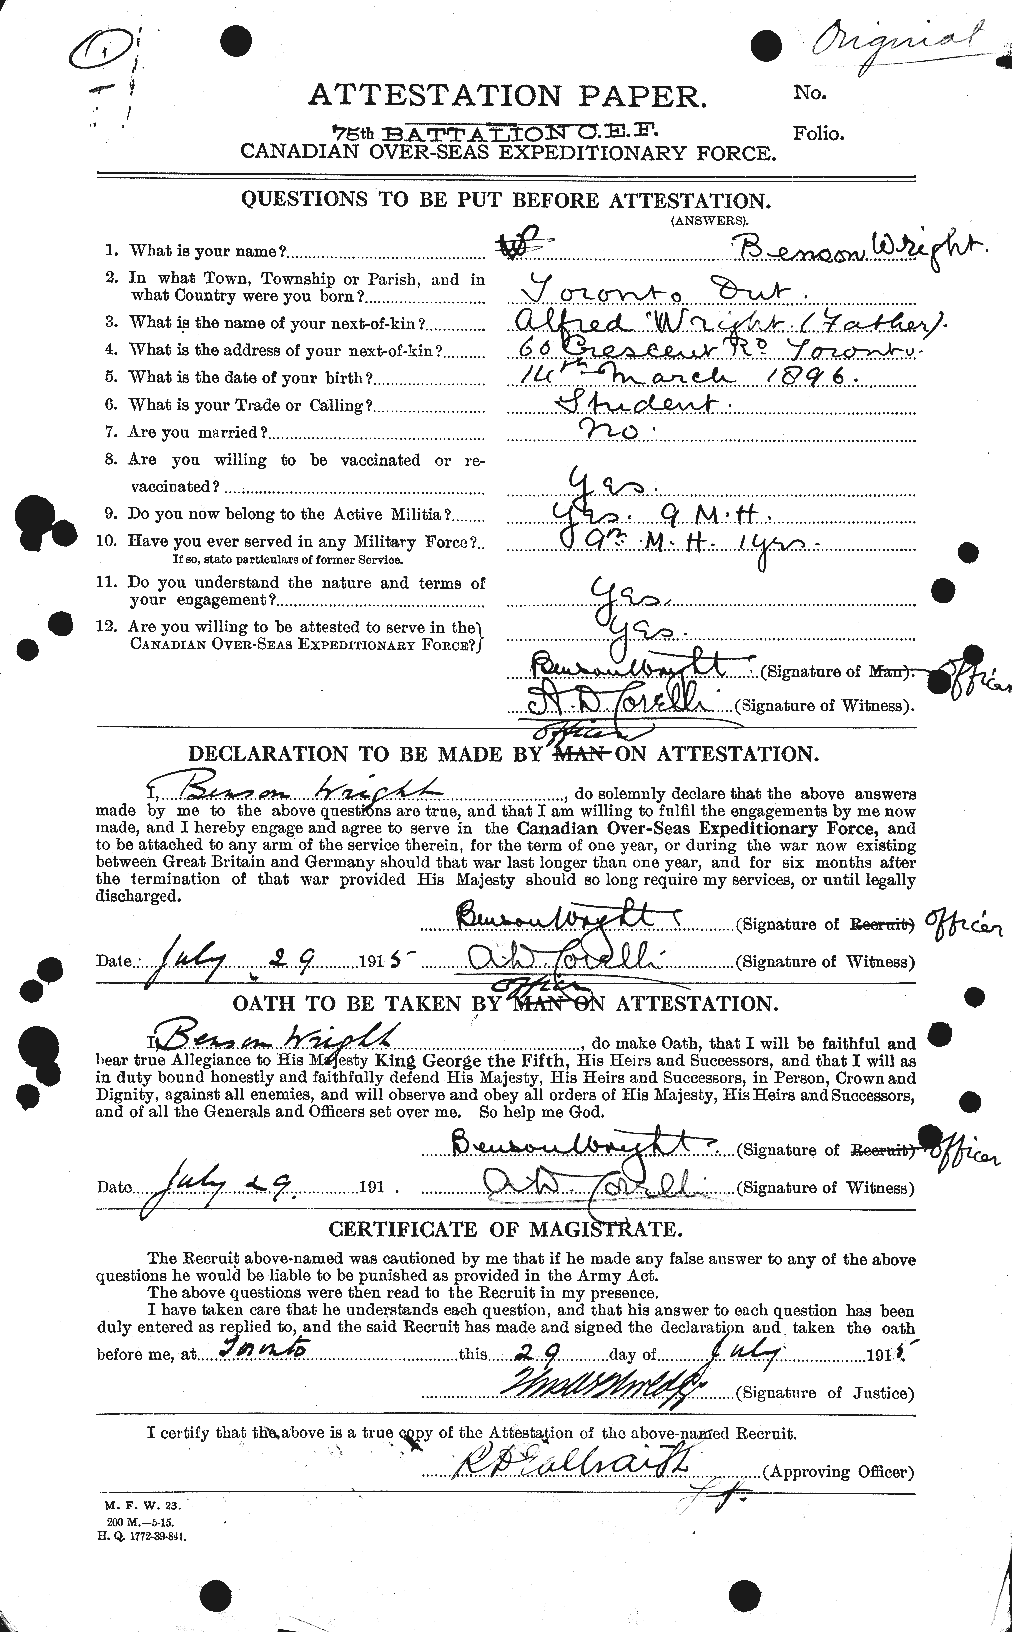 Personnel Records of the First World War - CEF 688200a